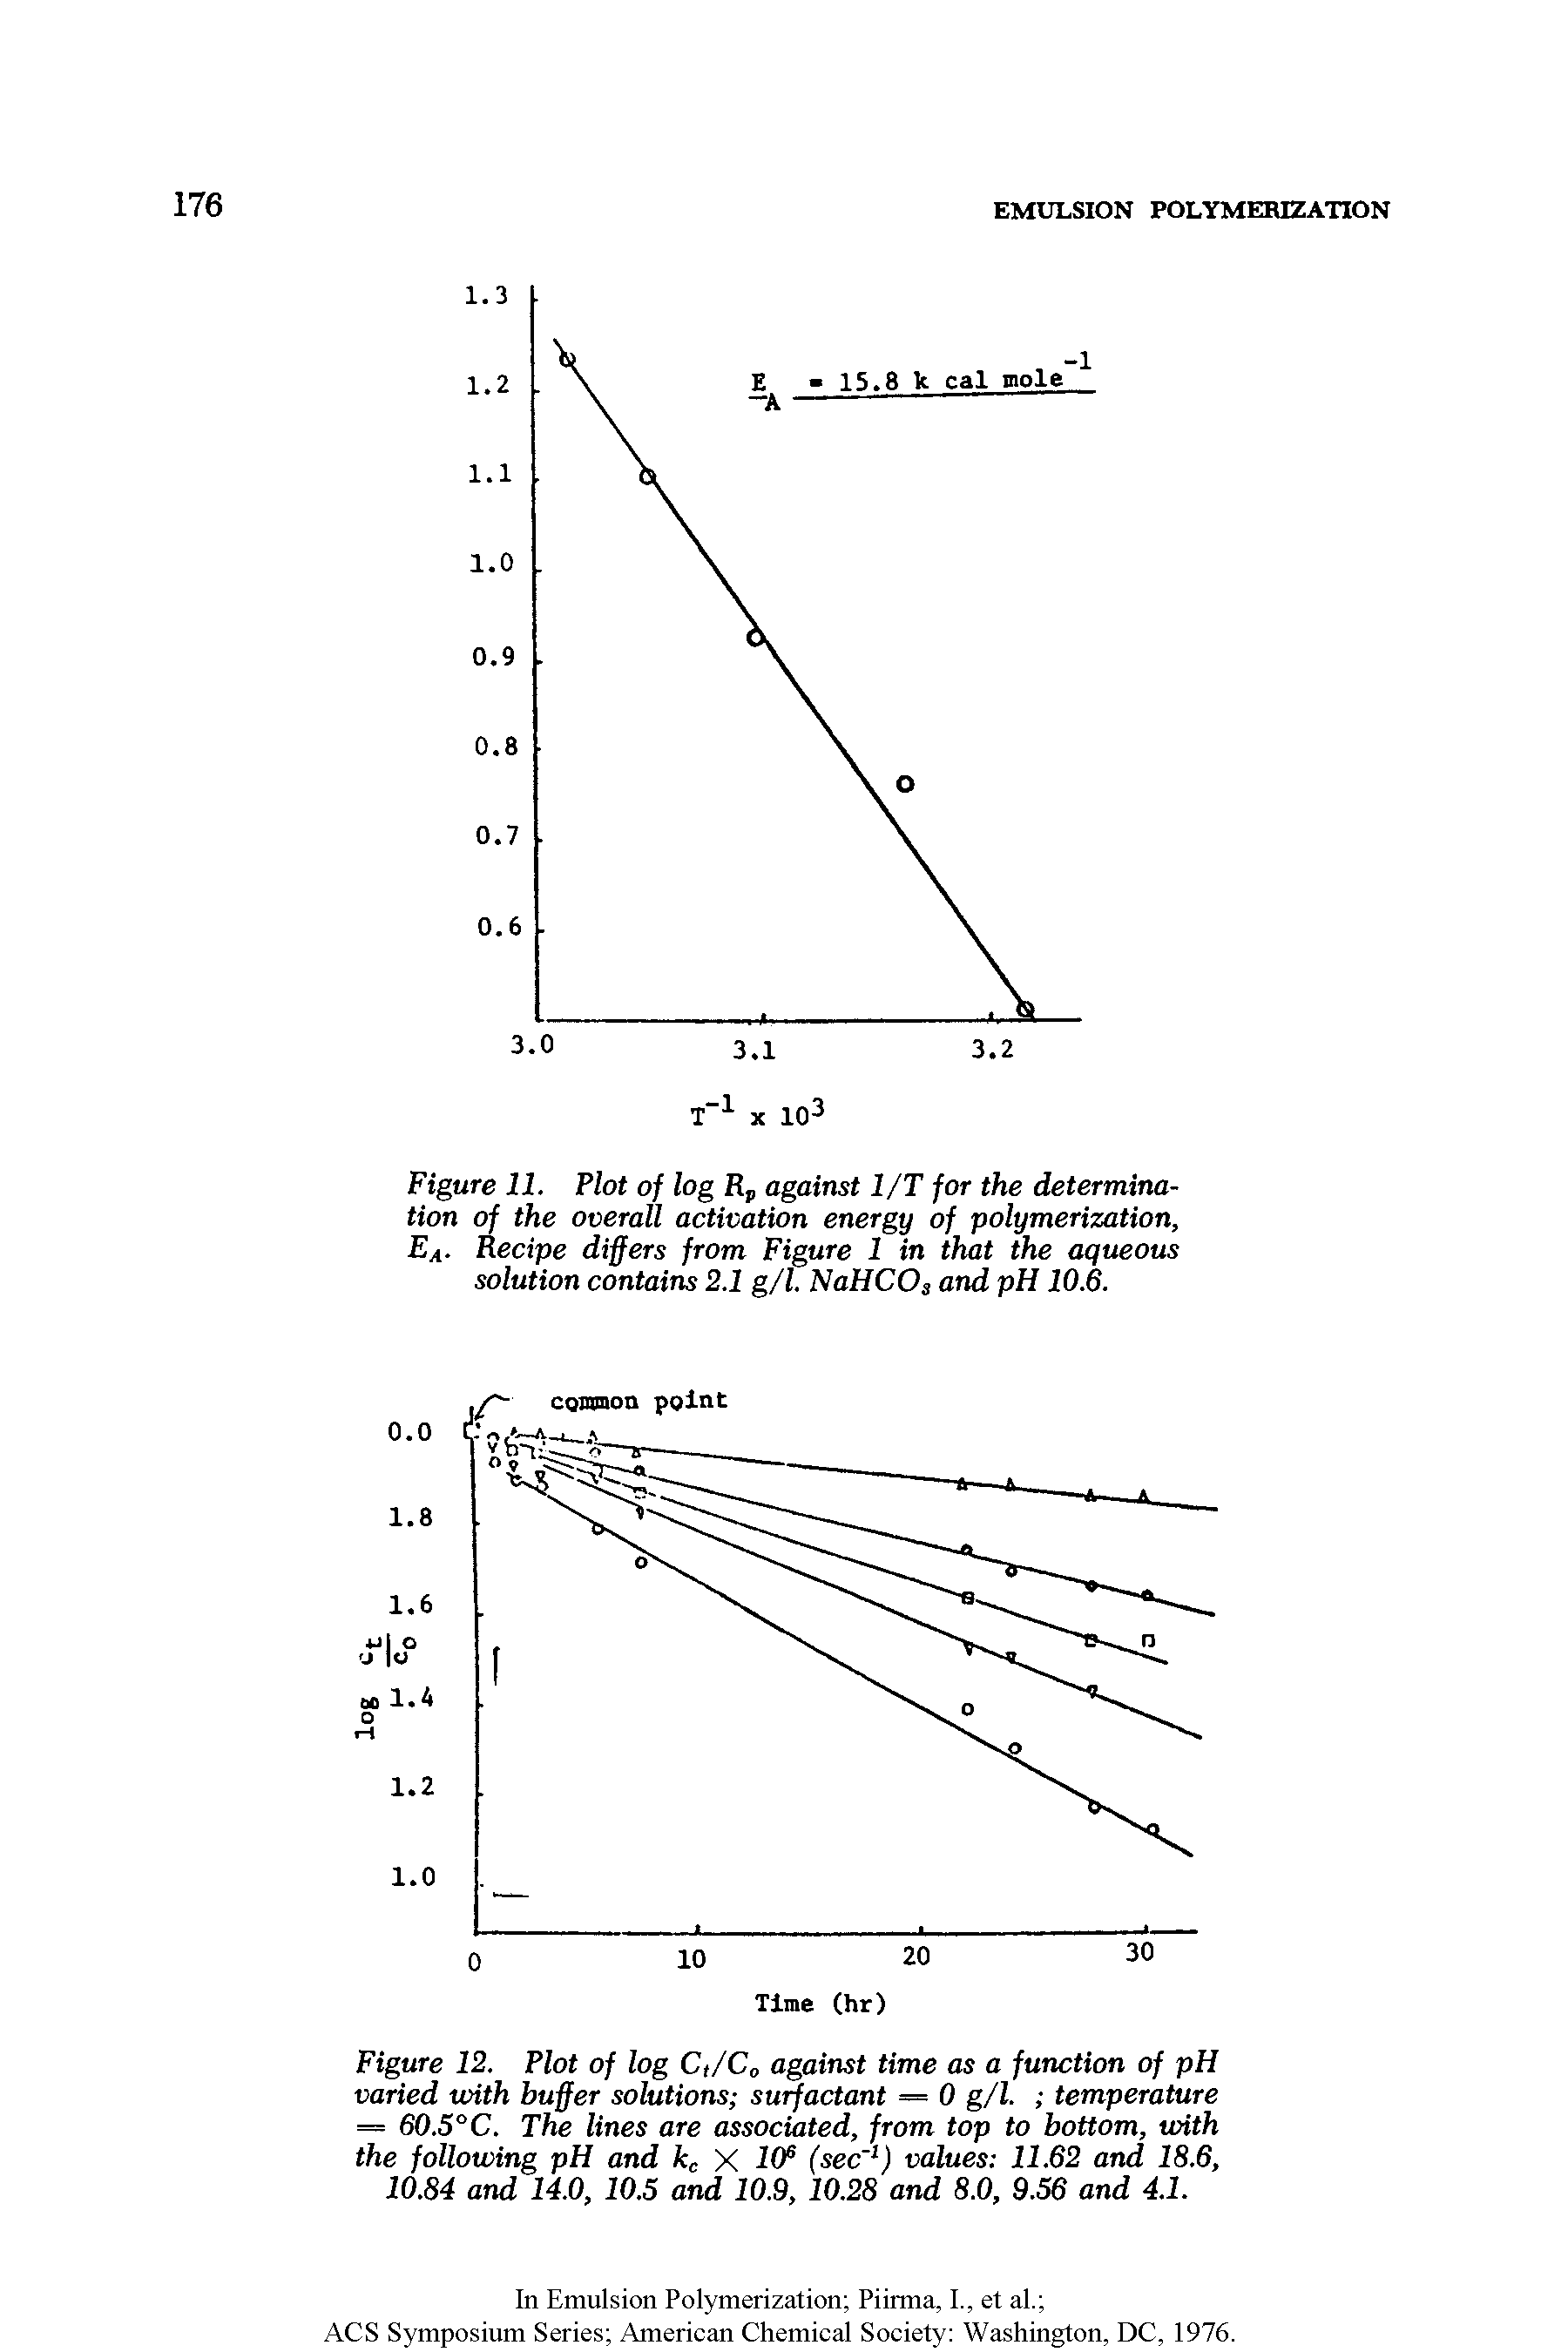 Figure 11. Plot of log Rp against 1/T for the determination of the overall activation energy of polymerization, 4. Recipe differs from Figure 1 in that the aqueous solution contains 2.1 g/l. NaHCOa and pH 10.6.